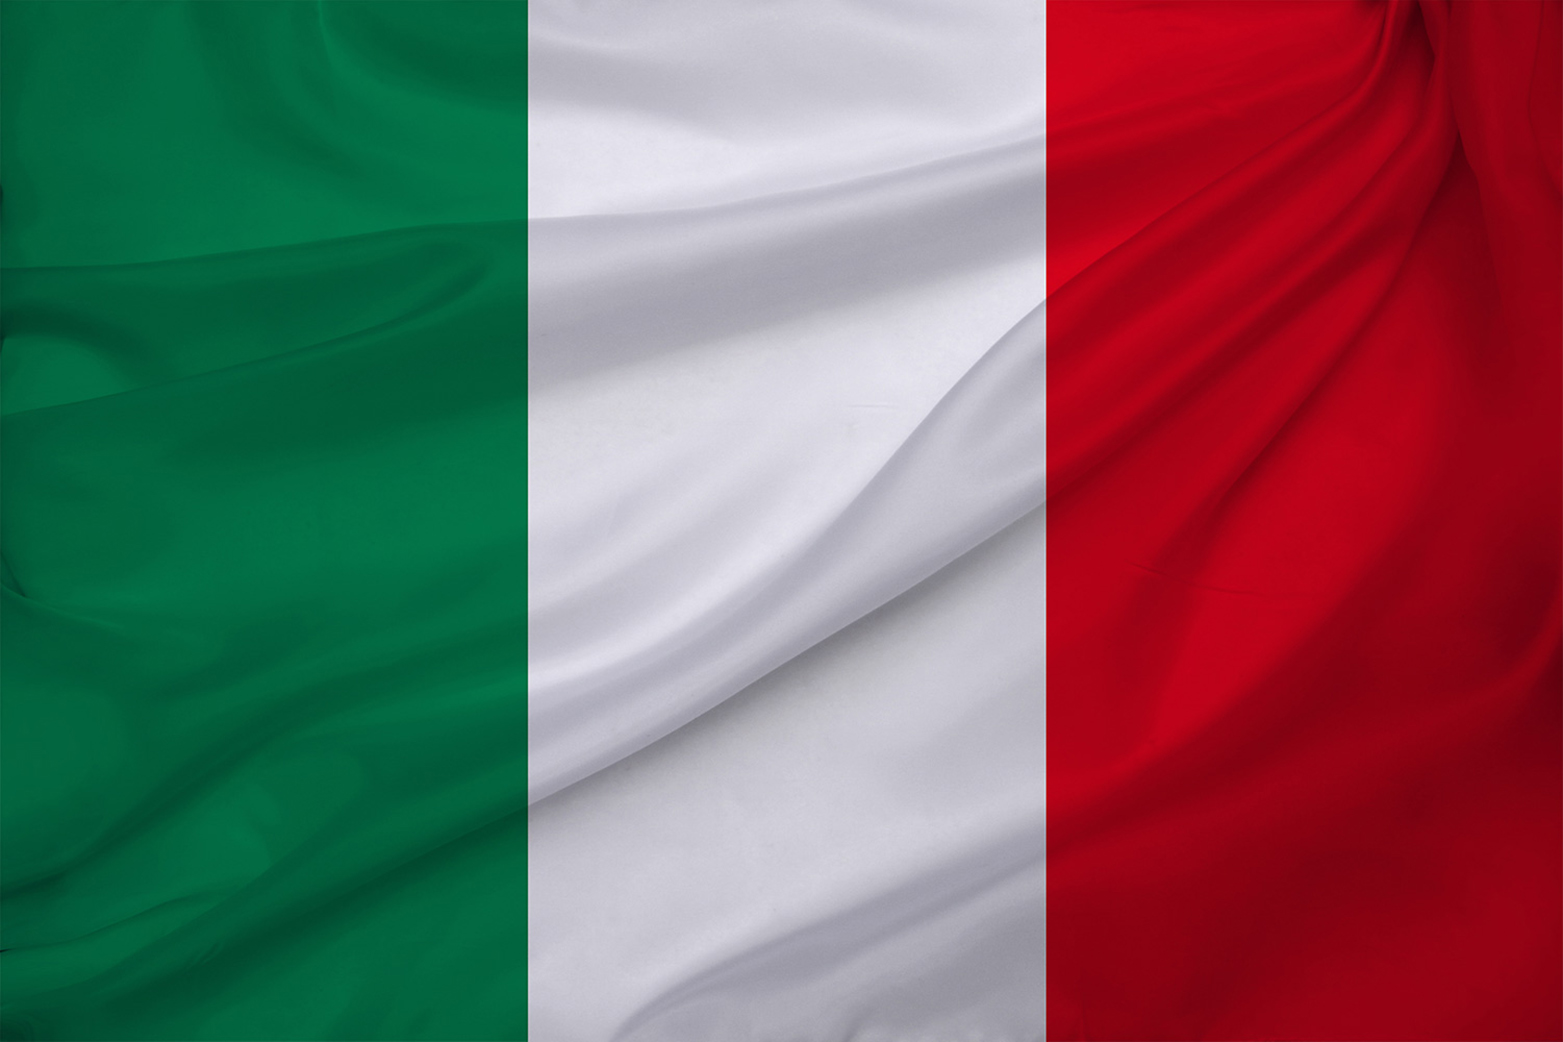 Italian tourist visa, conditions, fees, documents and embassy time